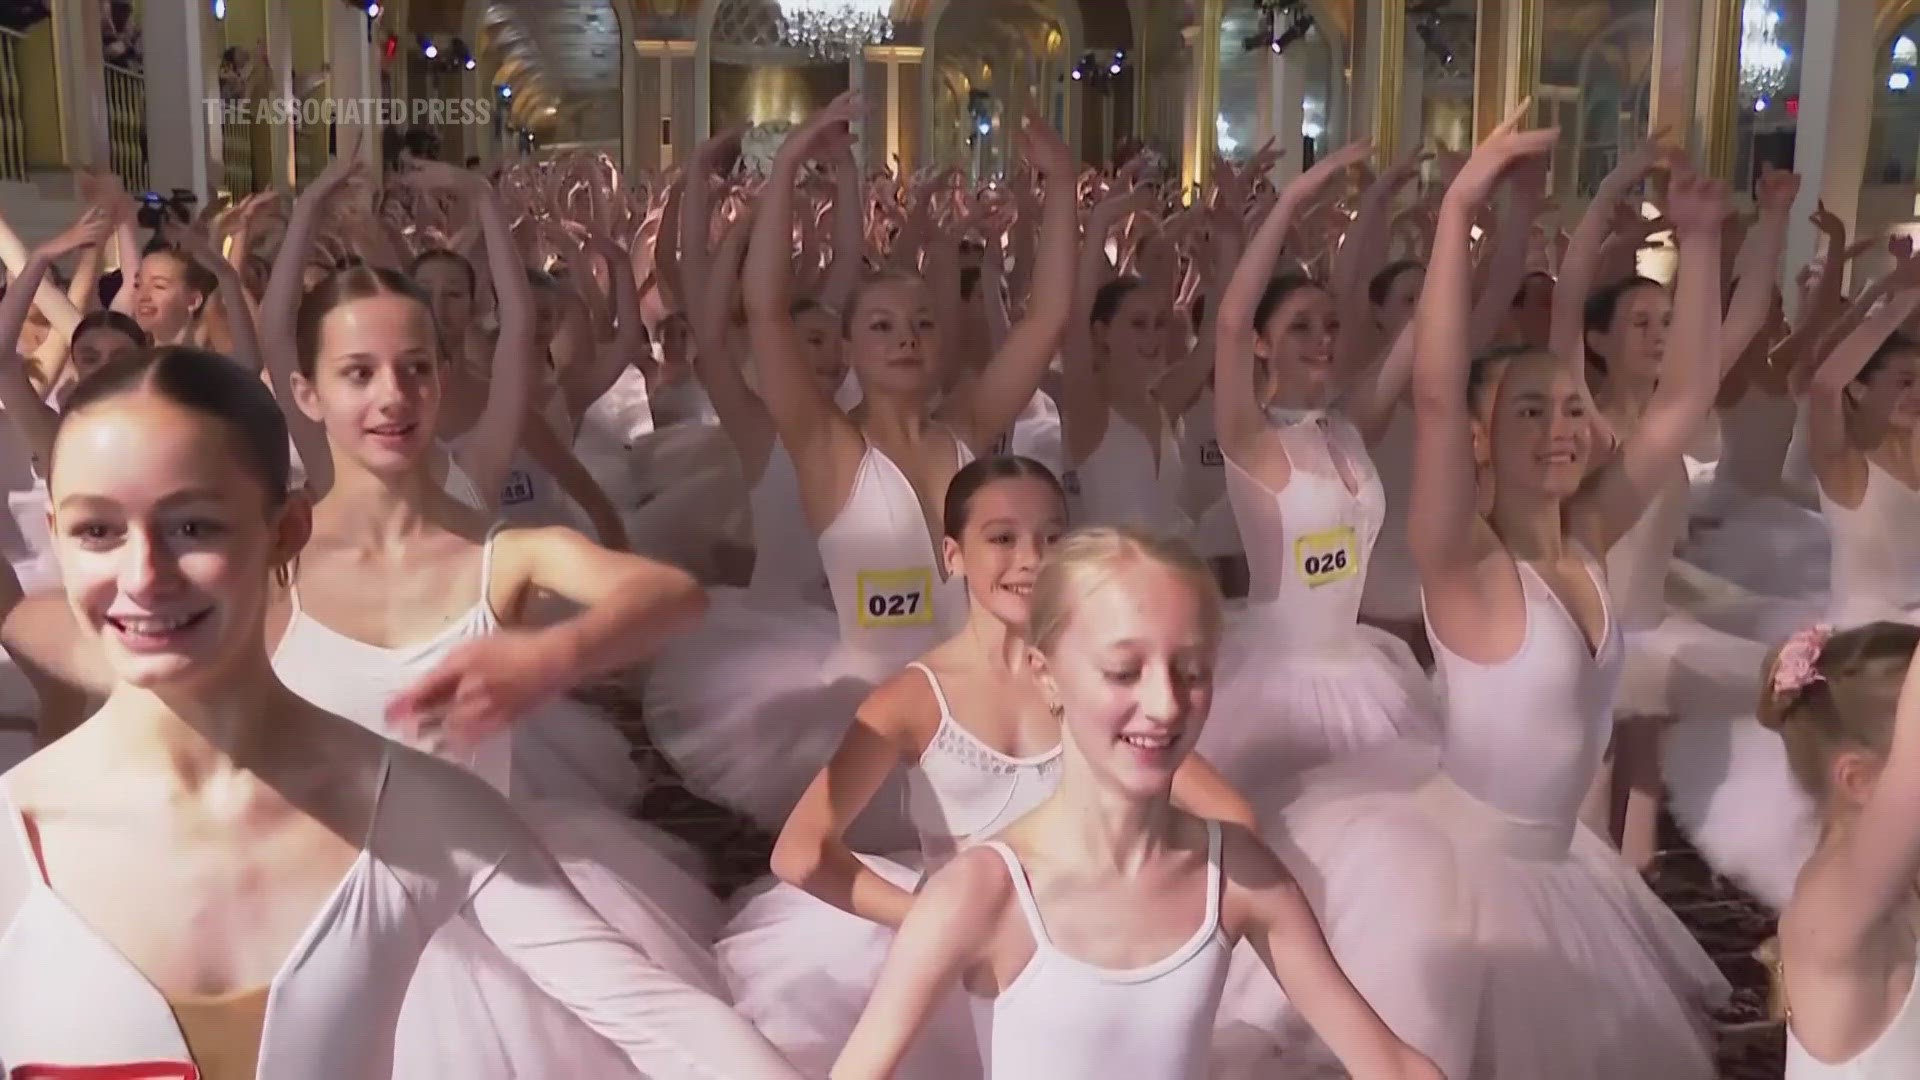 353 ballerinas from ages 9 through 19 participated in breaking the world record for dancing on pointe.